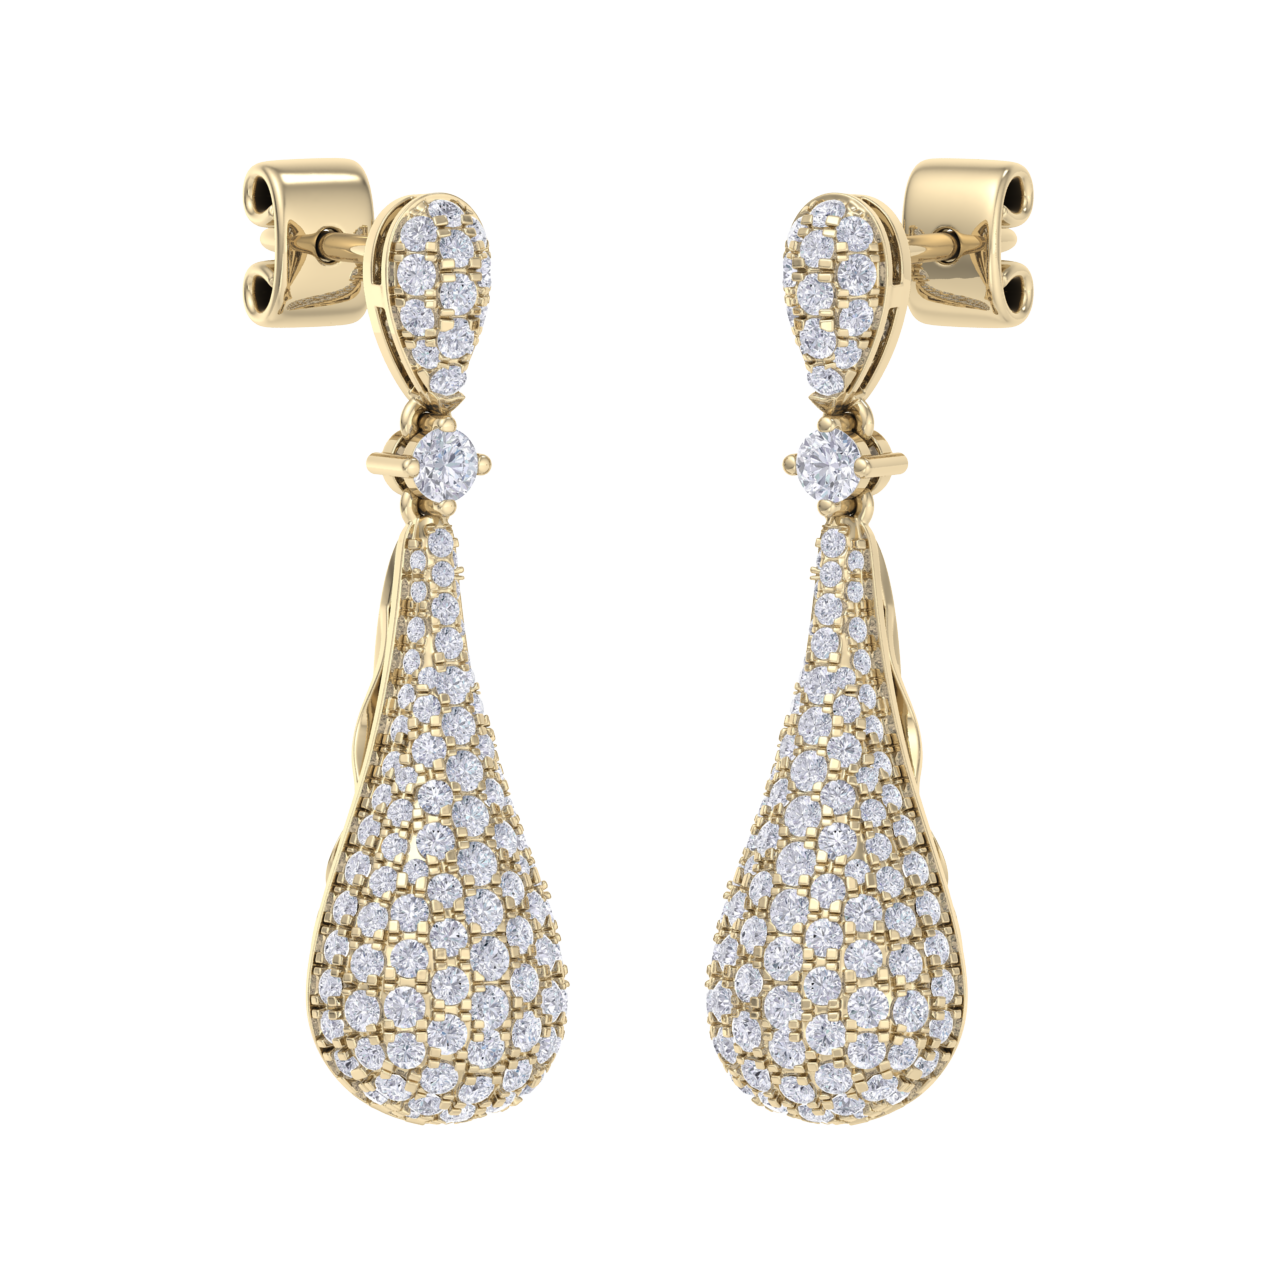 Diamond chandelier earrings in yellow gold with white diamonds of 1.73 ct in weight